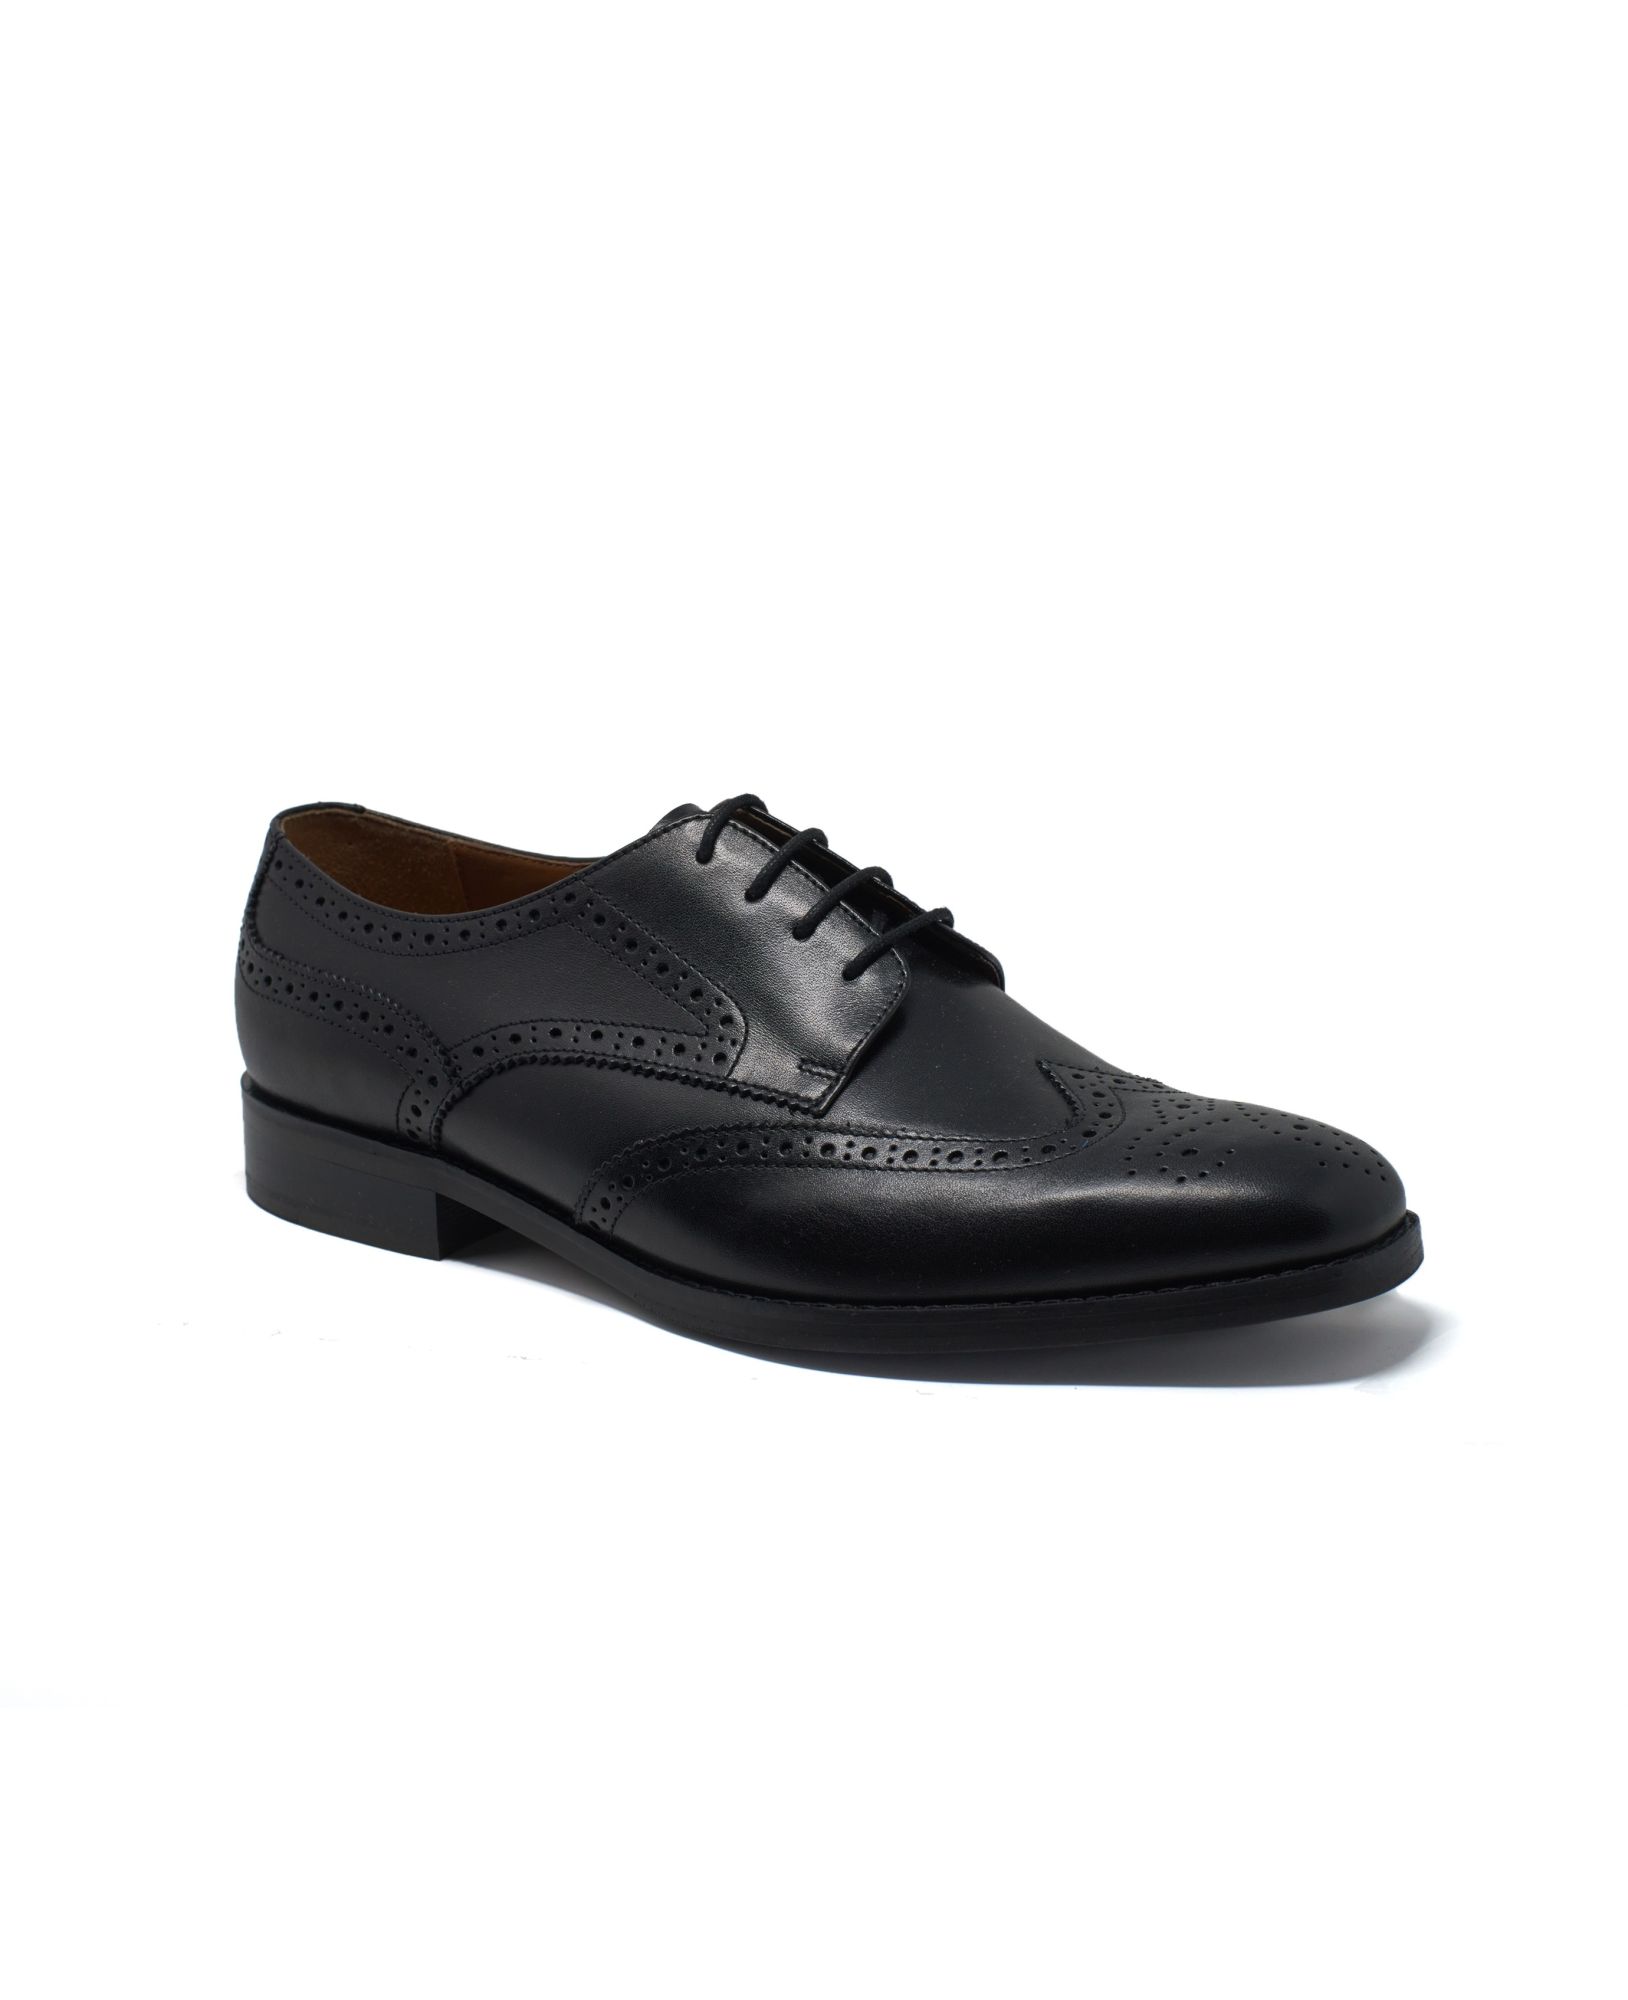 Black Leather Derby Shoes With Brogue Detailing 12